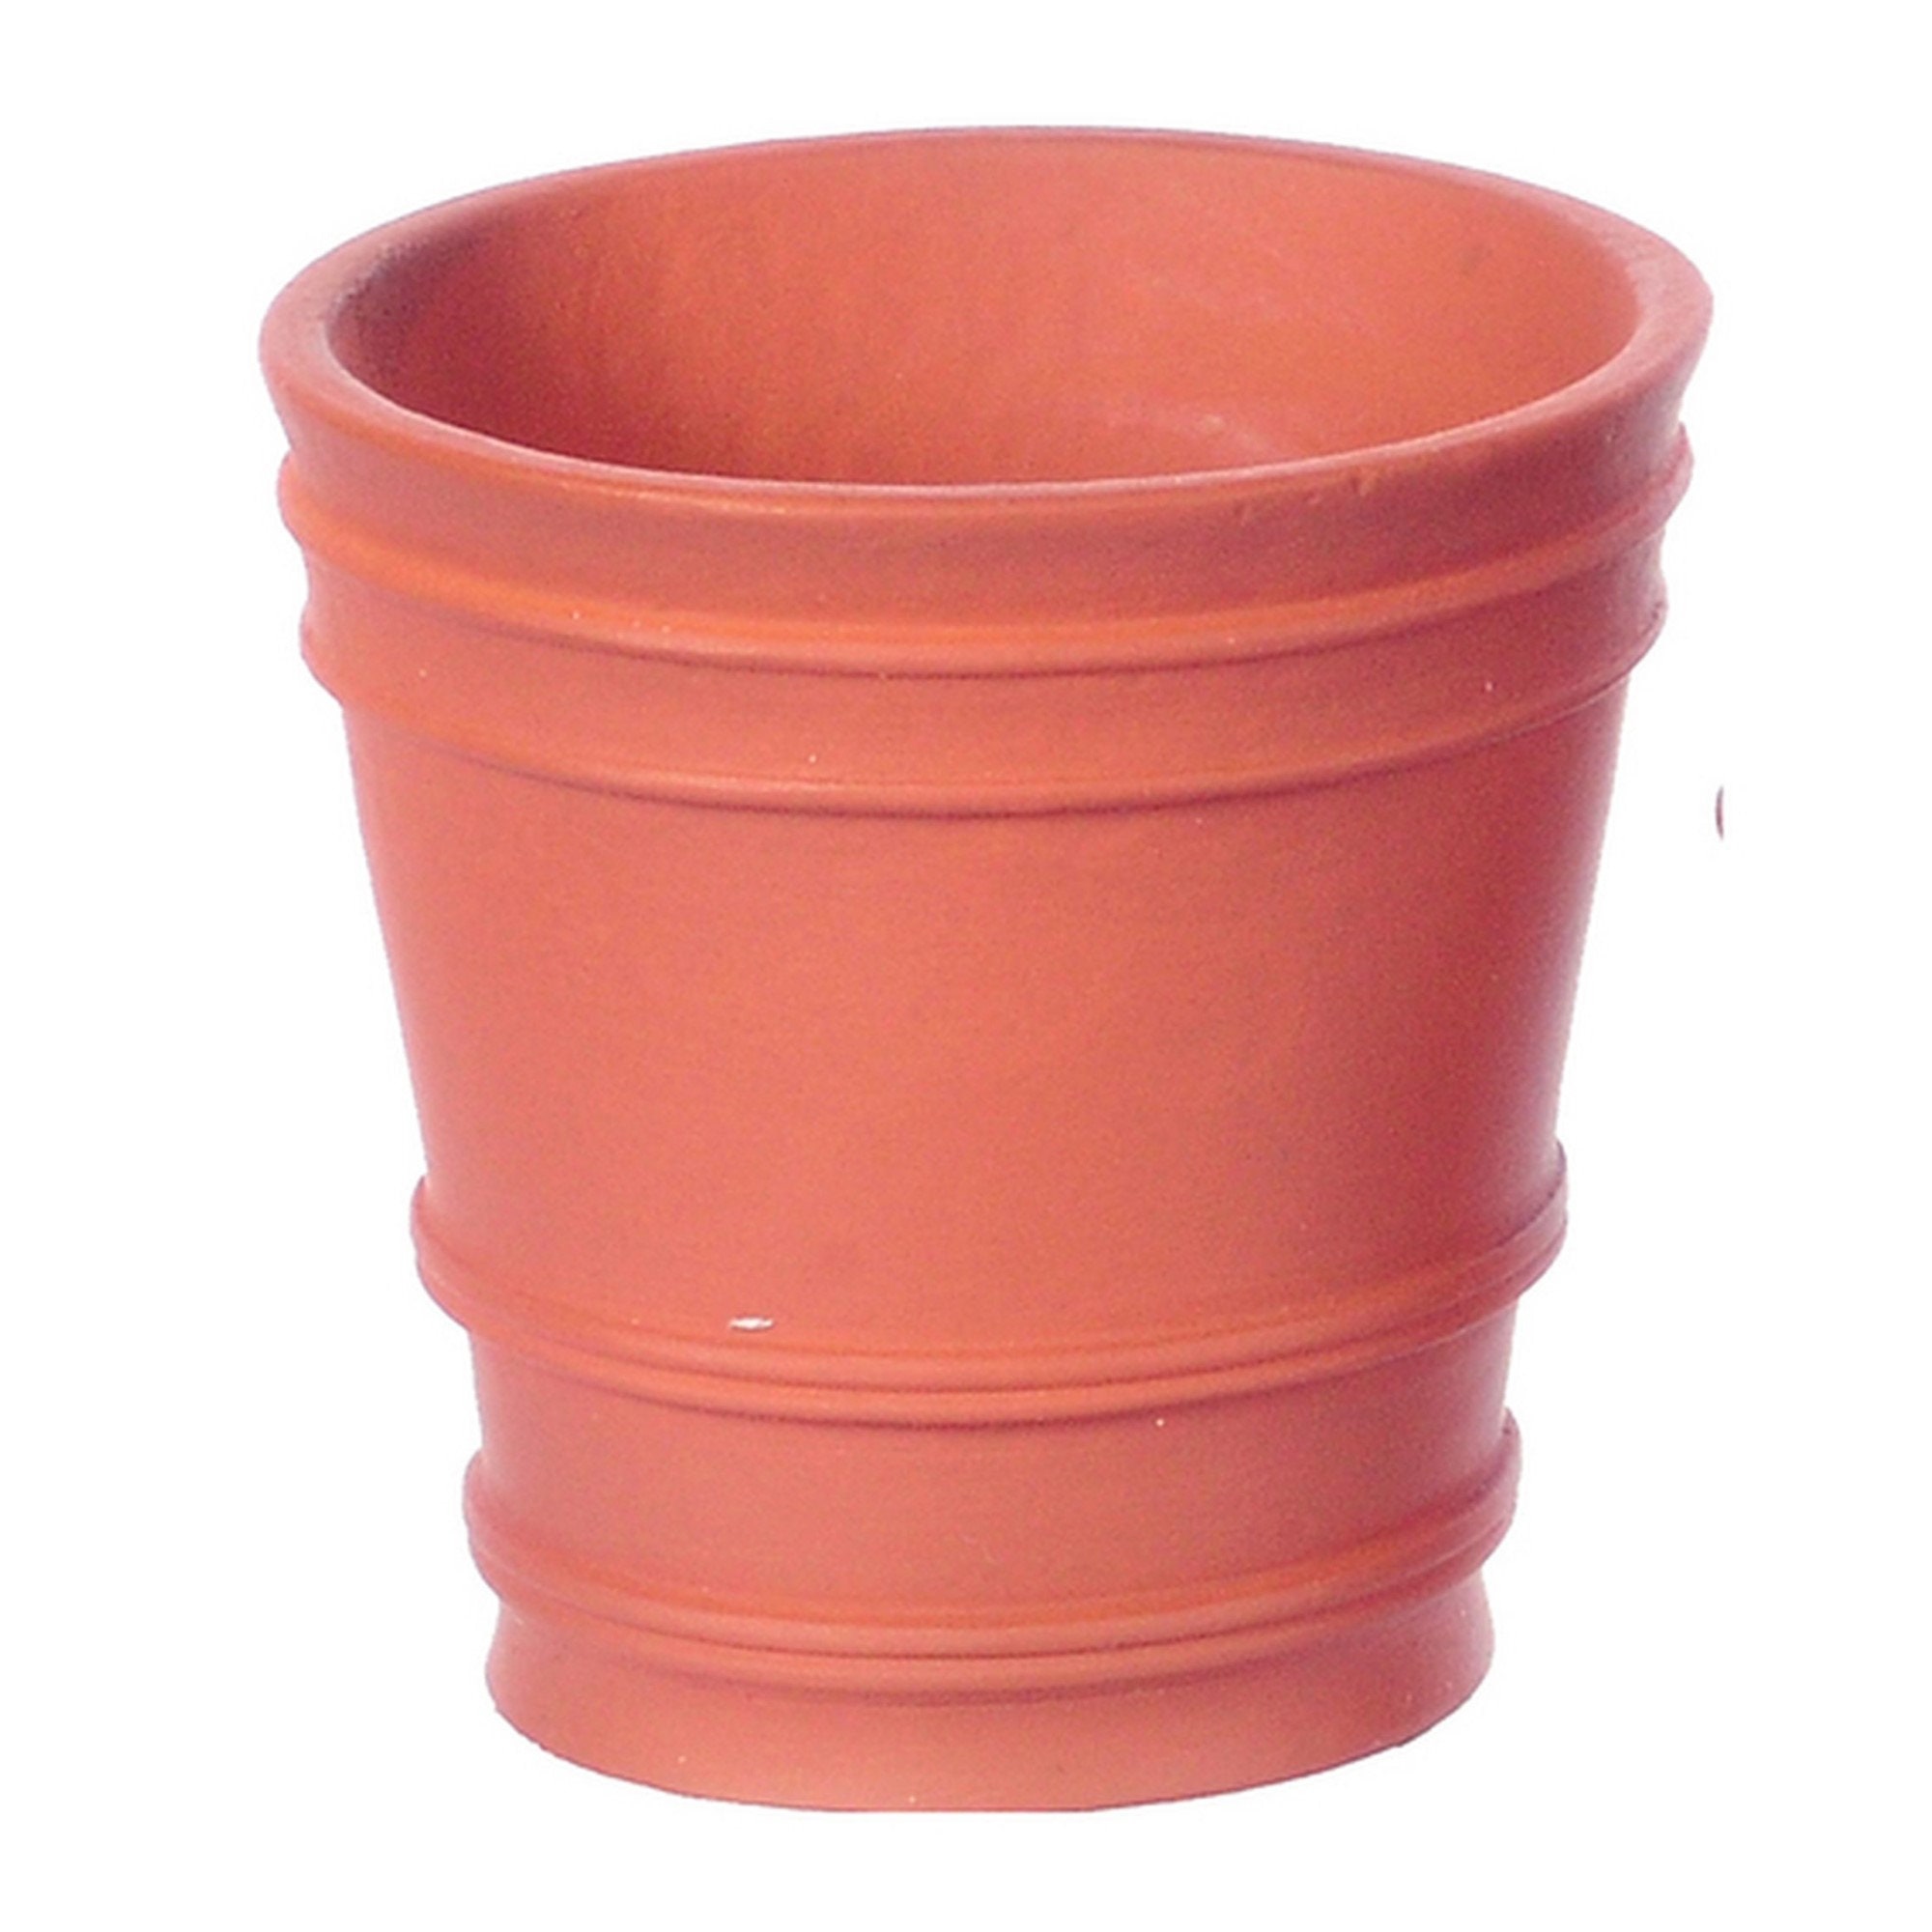 Extra Large Terracotta Pot and Saucer – MARCH